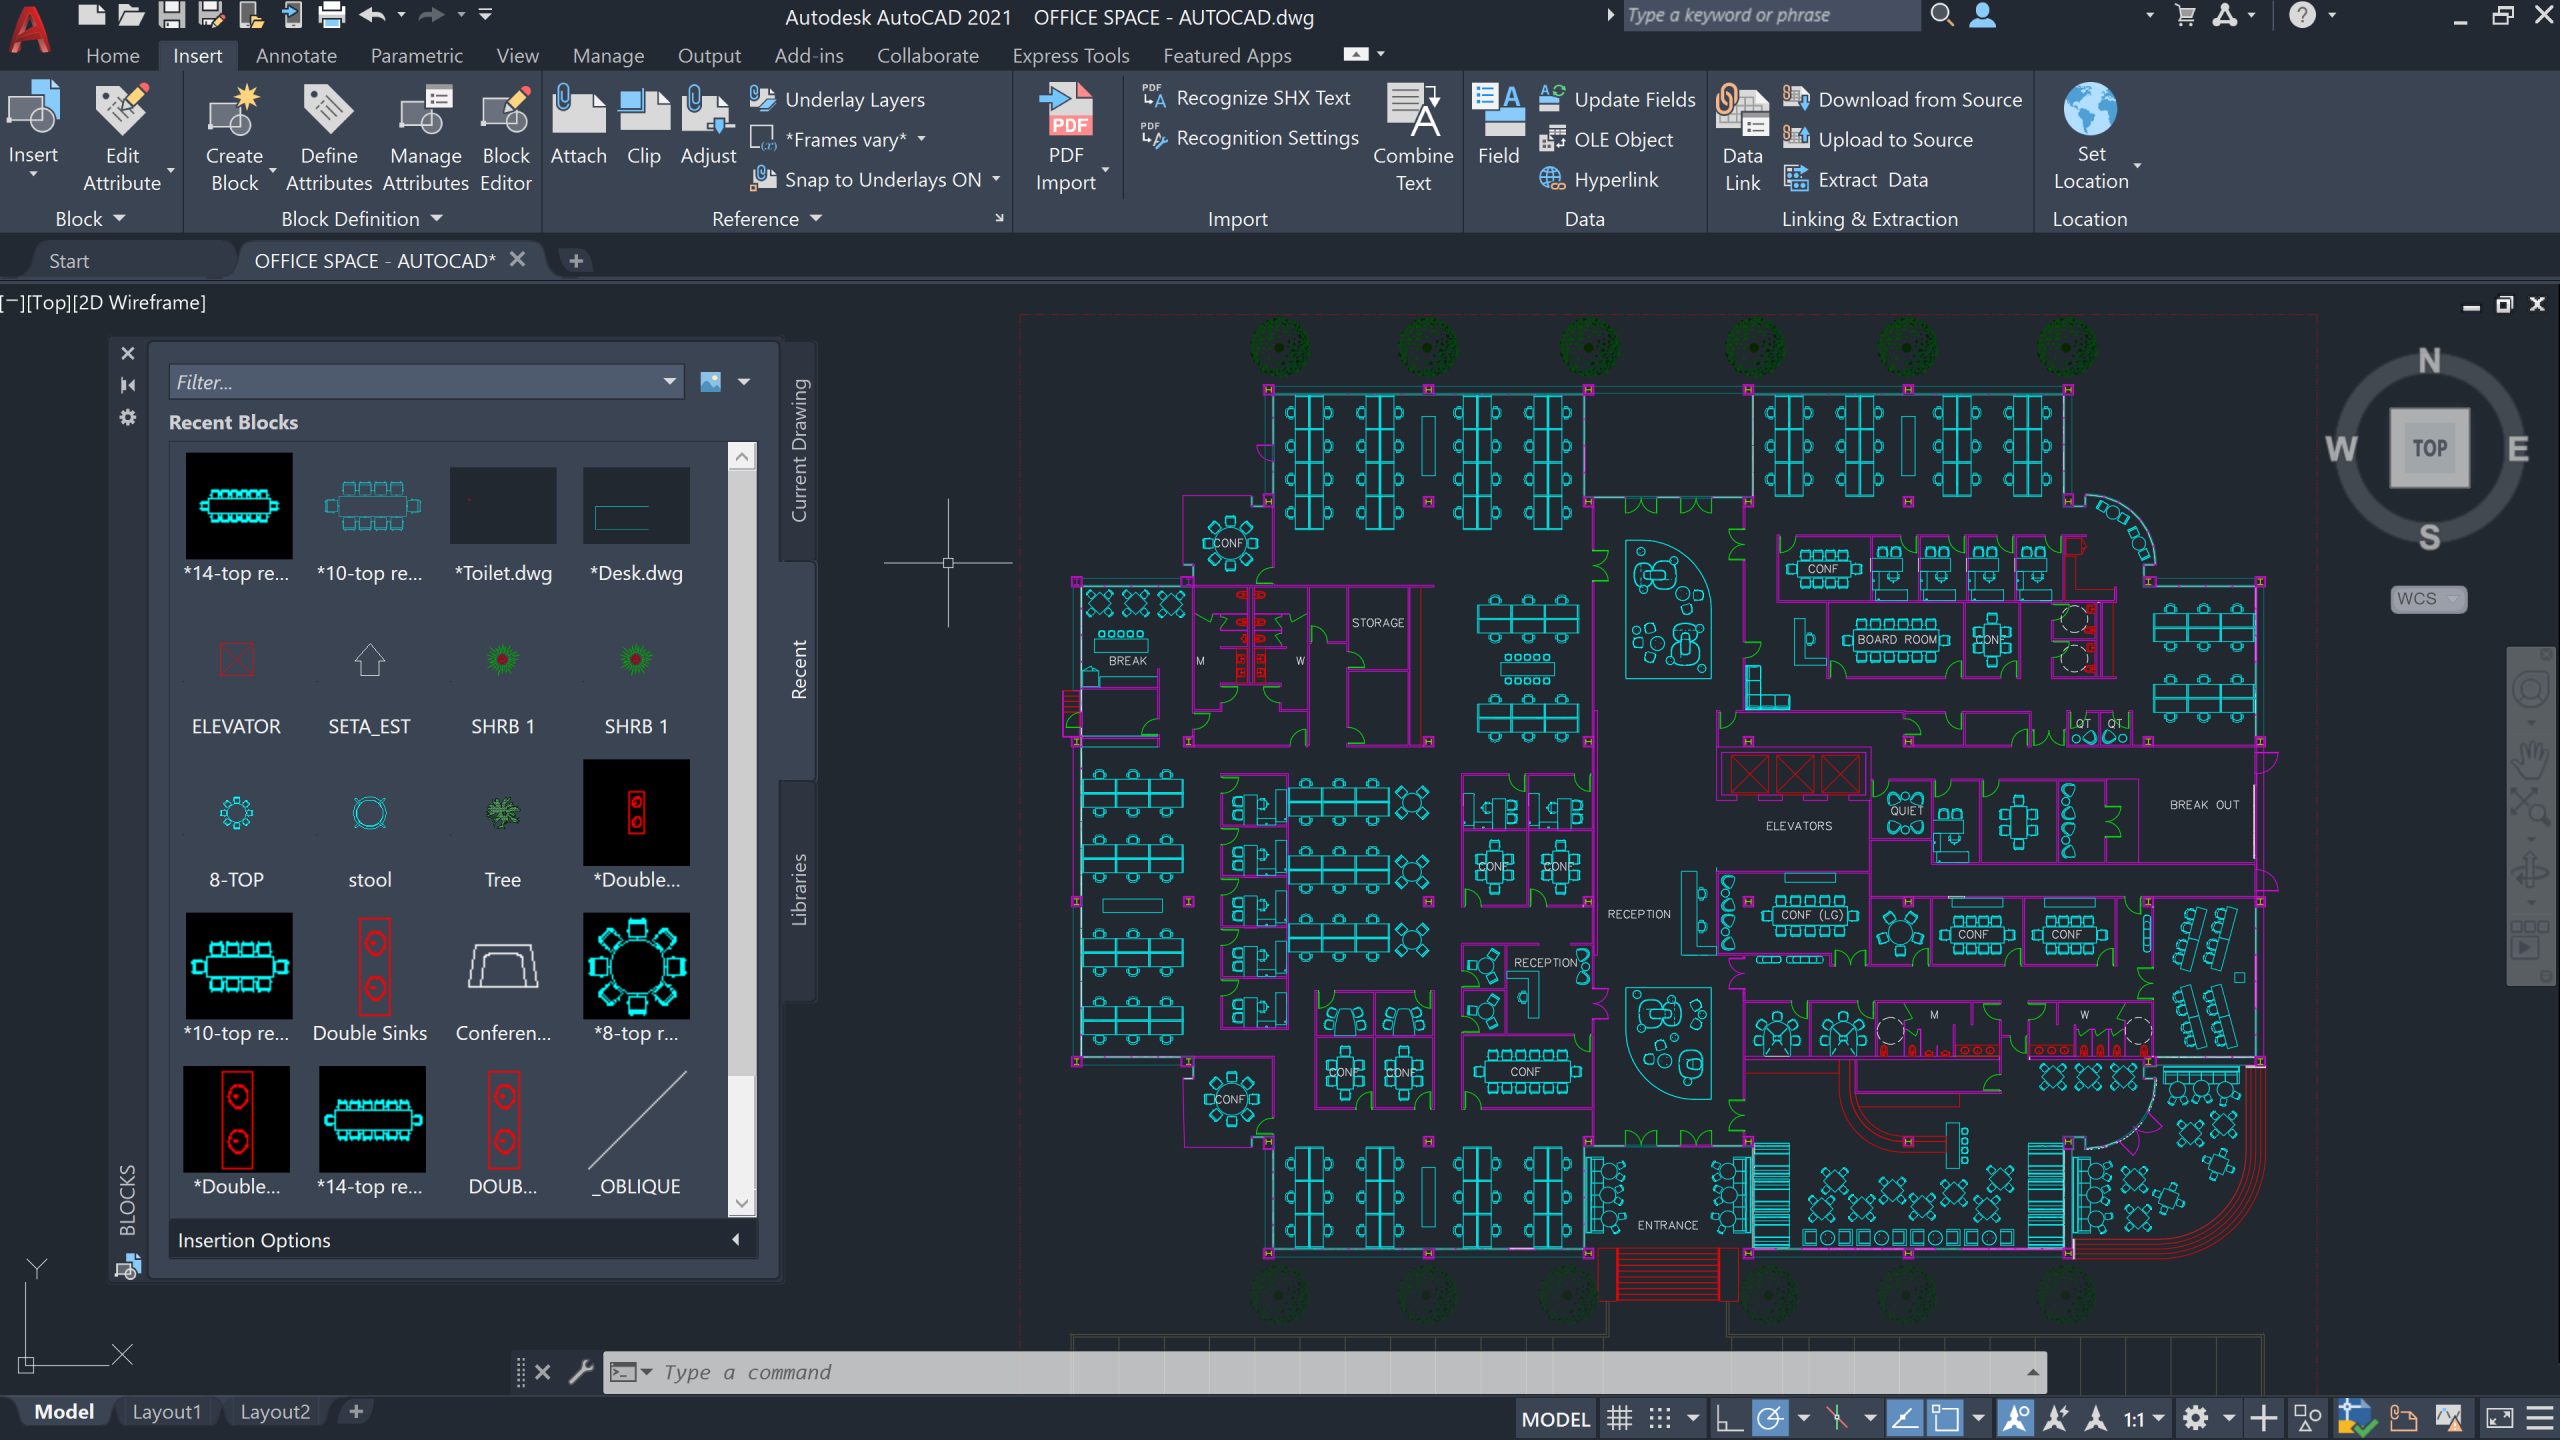 Autodesk AUTOCAD 2021 Full Version Download Now